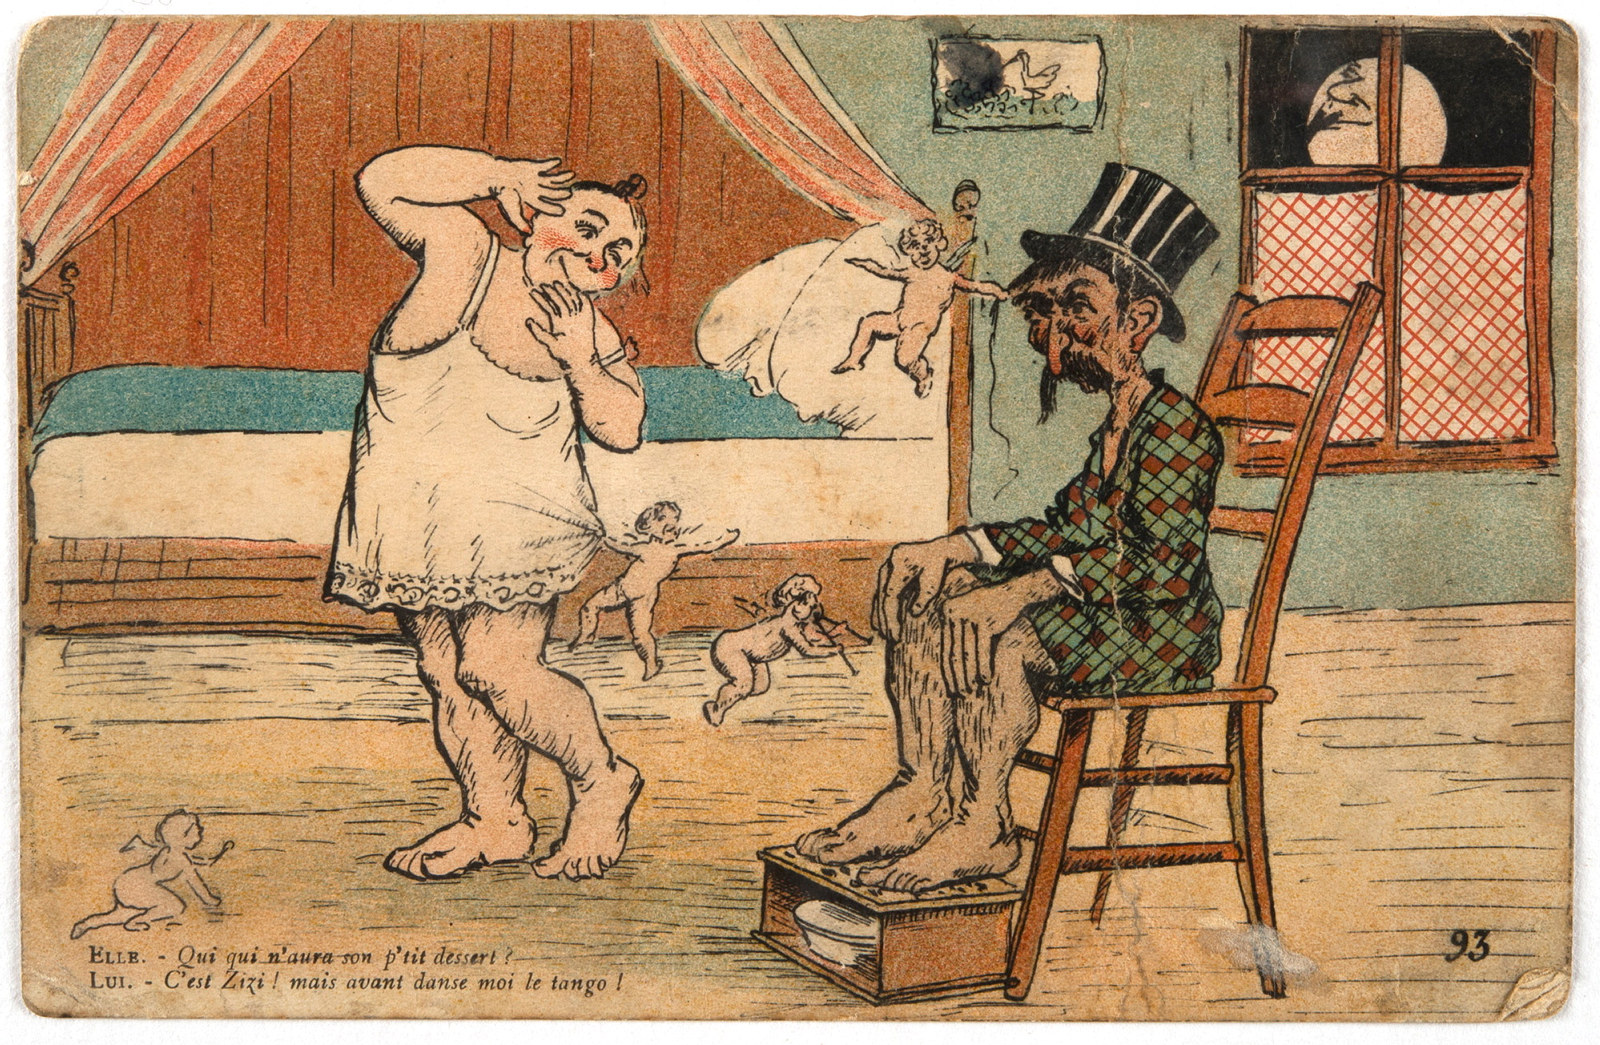 Colour postcard featuring a caricature illustration of a woman dressed in a nightgown alongside a man seated in a chair, from an album compiled by Mary (Girlie) Andersen, circa 1900 - 1940s